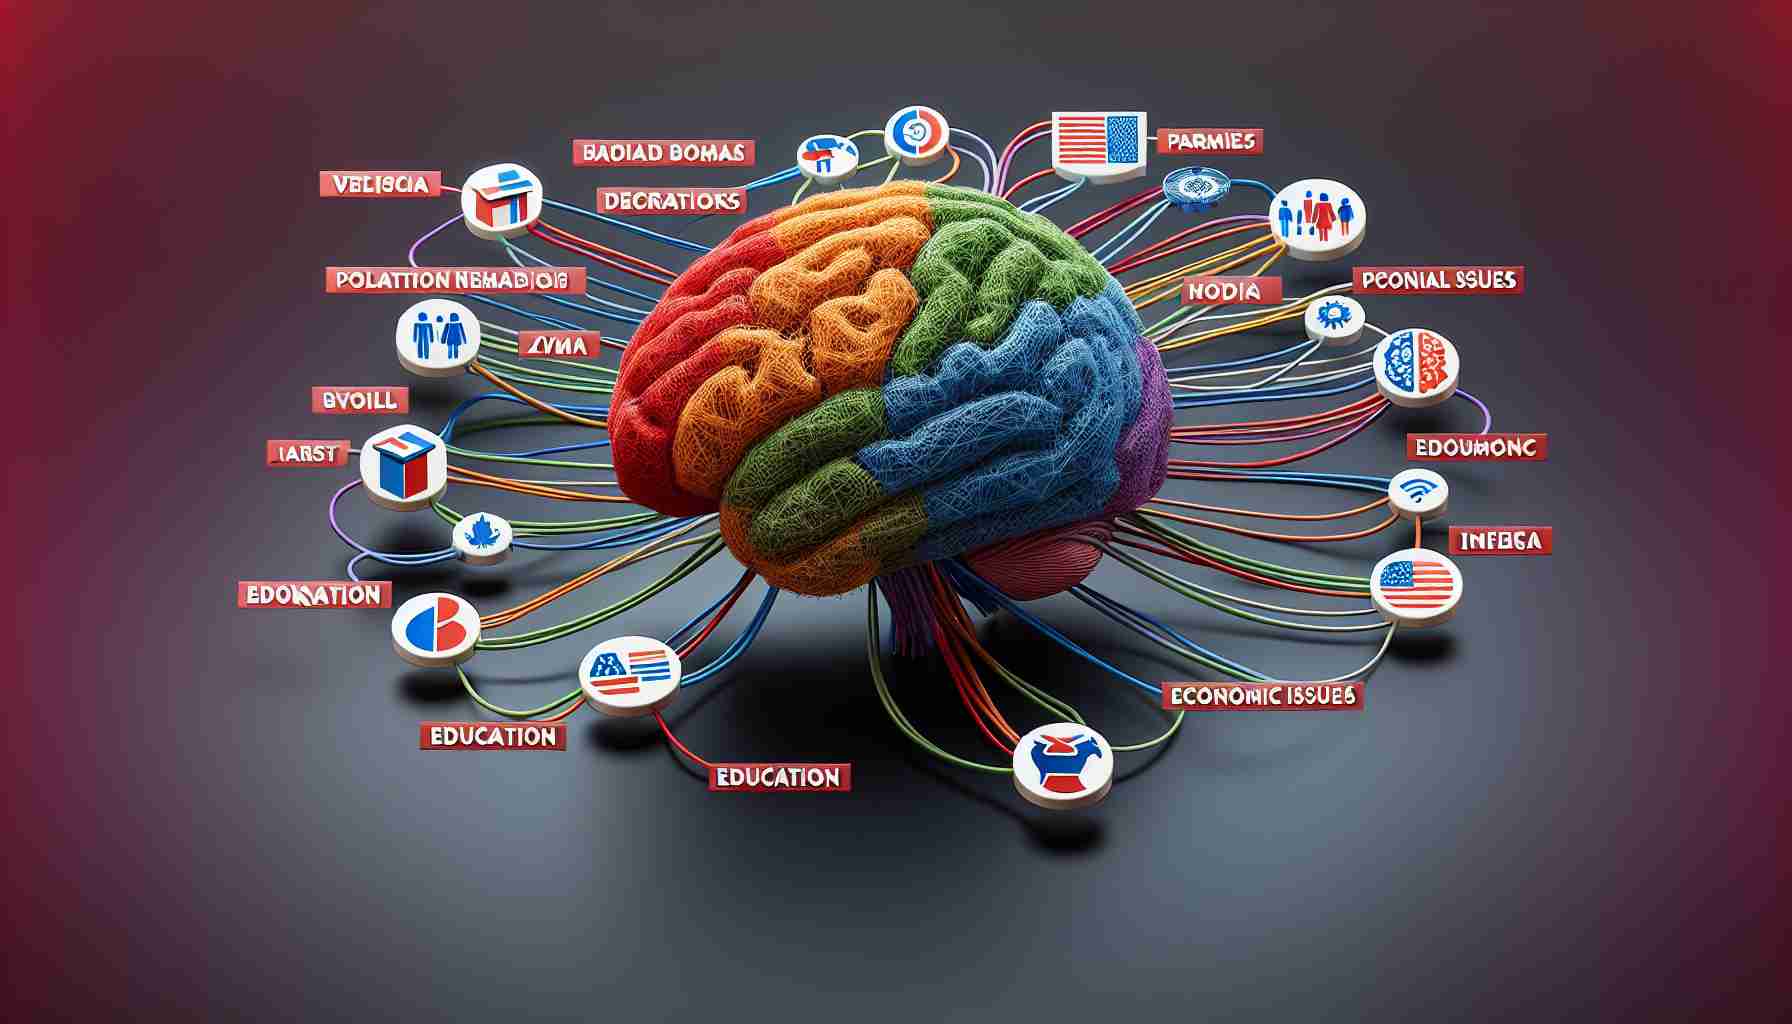 Create a high-definition, realistic image representing the diverse factors influencing voter decisions. This could manifest visually as various representative symbols, such as a ballot box, political parties' flags (not linked to any real parties), diverse population demographics, social issues symbols, economic indicators, education and media influence. All this can be seen as threads or paths leading to a human brain, symbolizing the decision-making process.